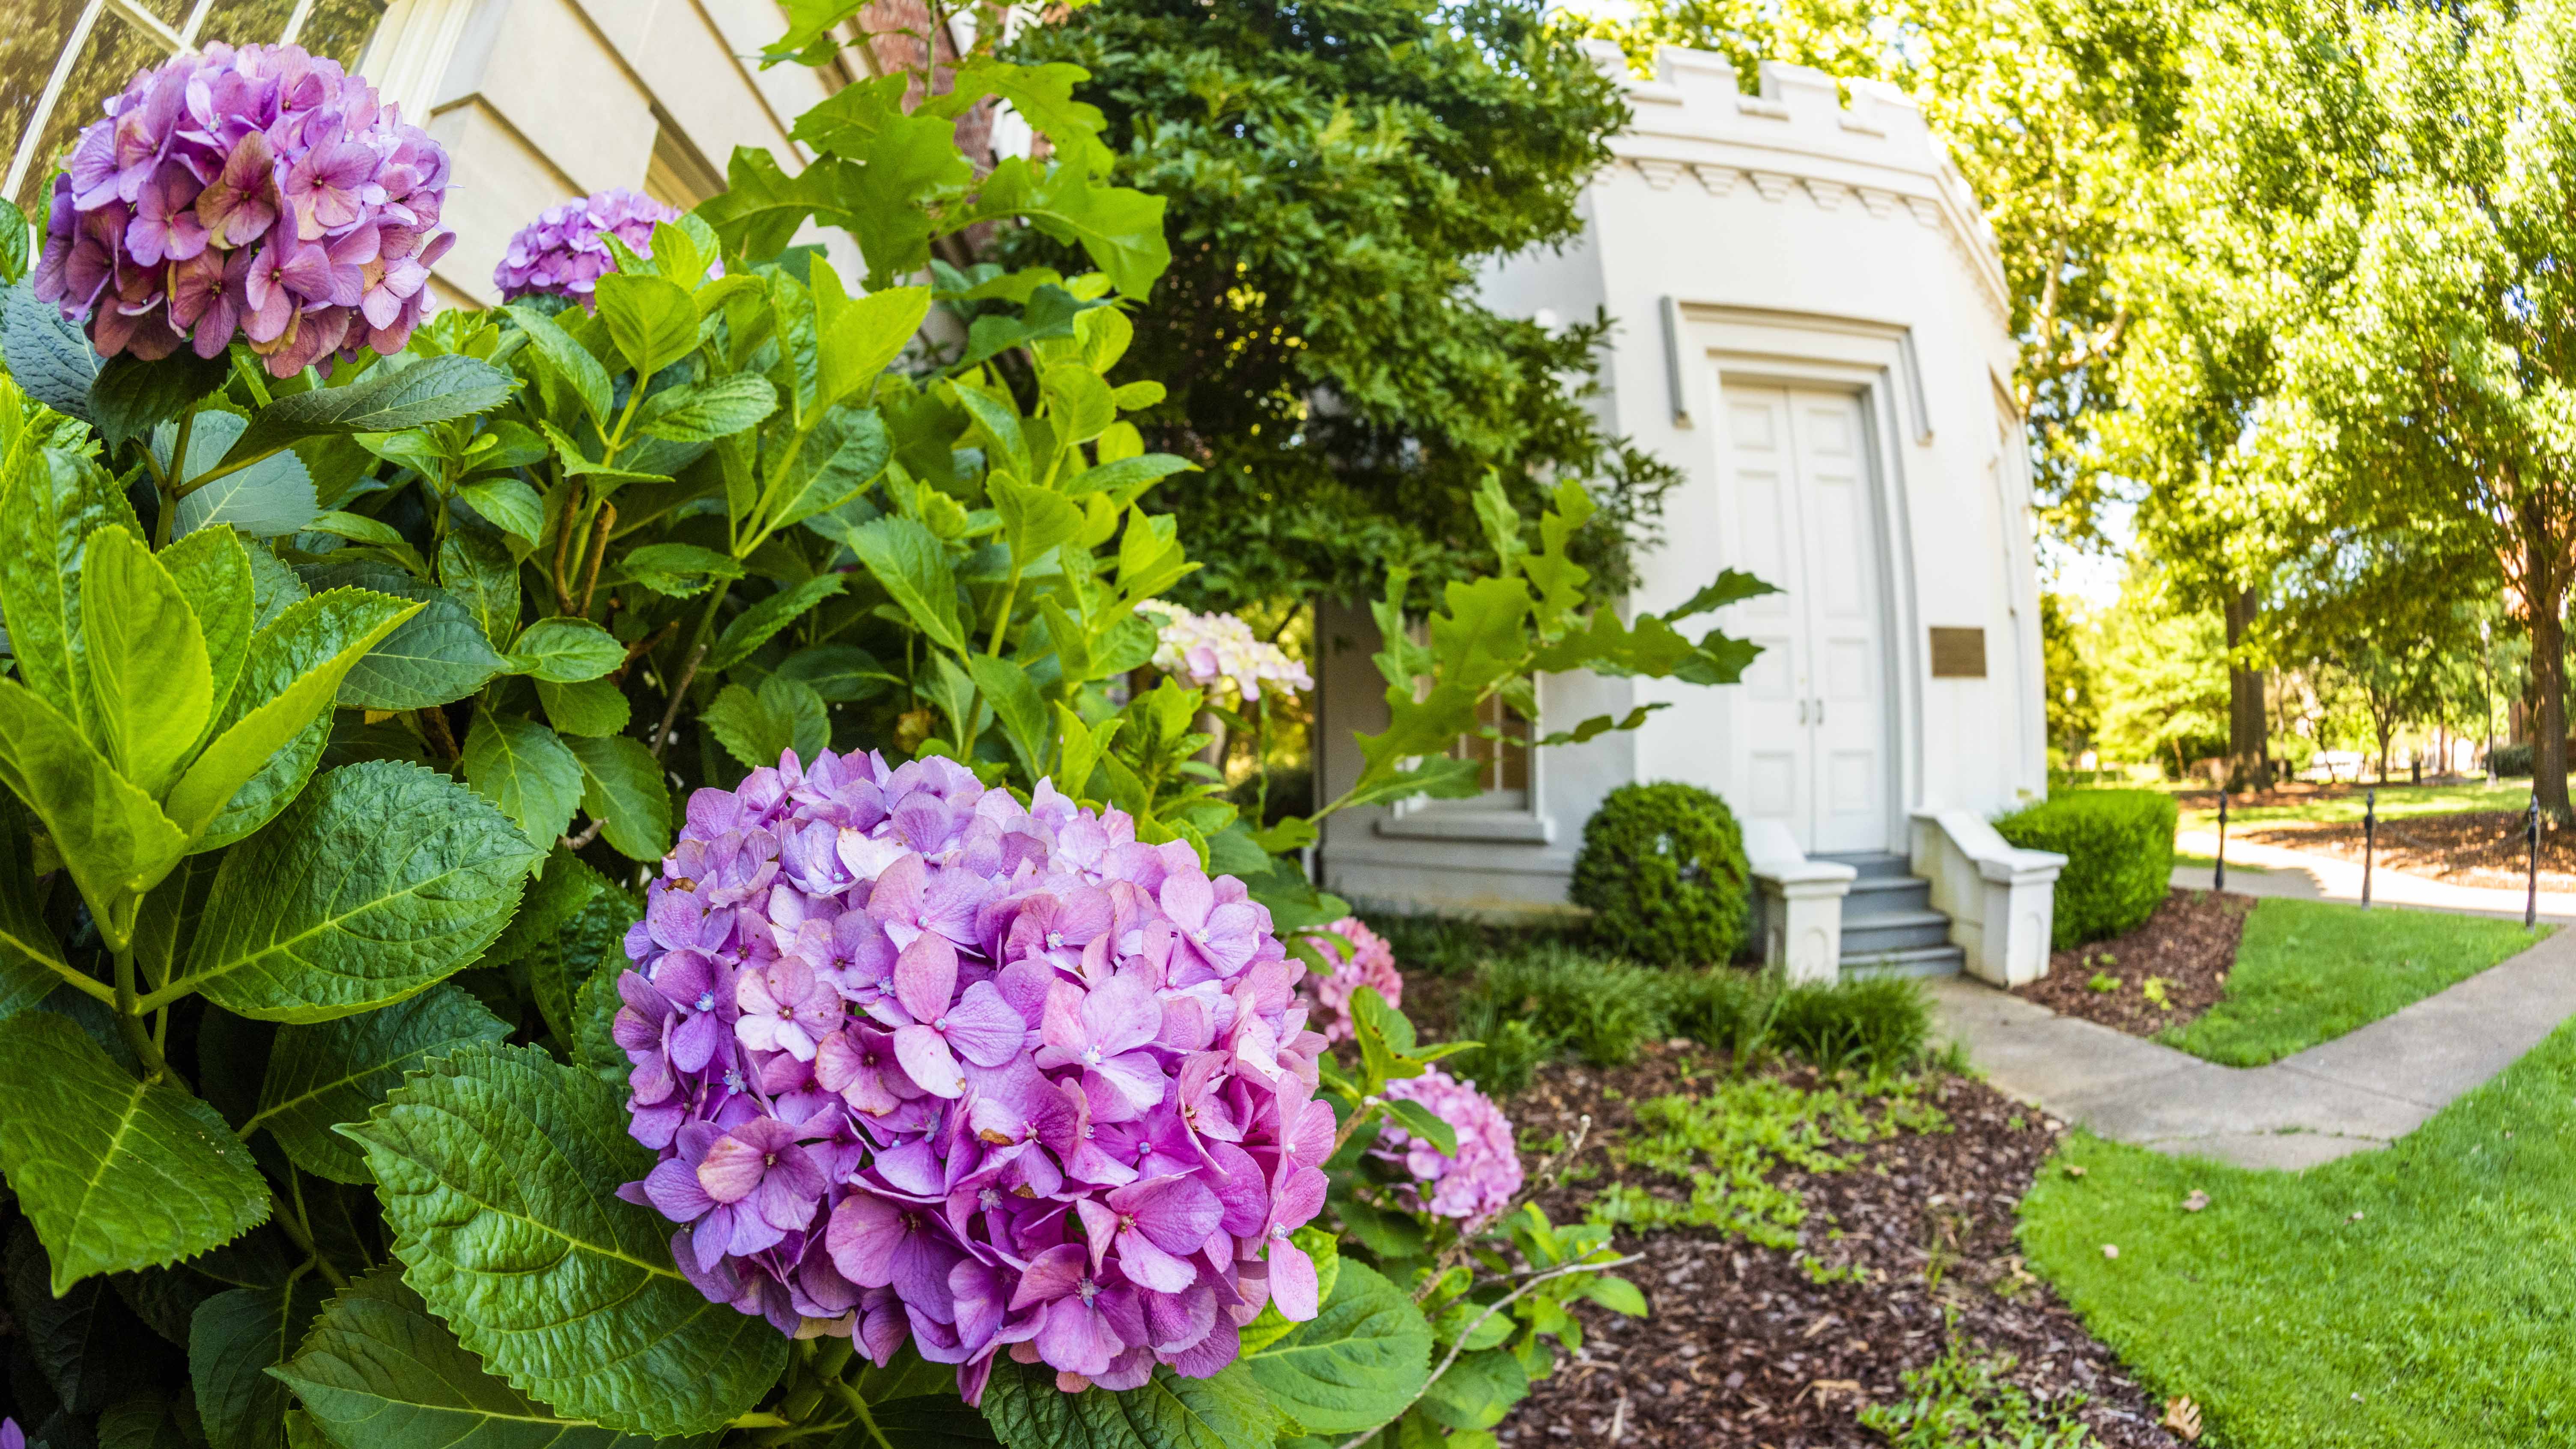 A hydrangea bloom with the Round House in the background.